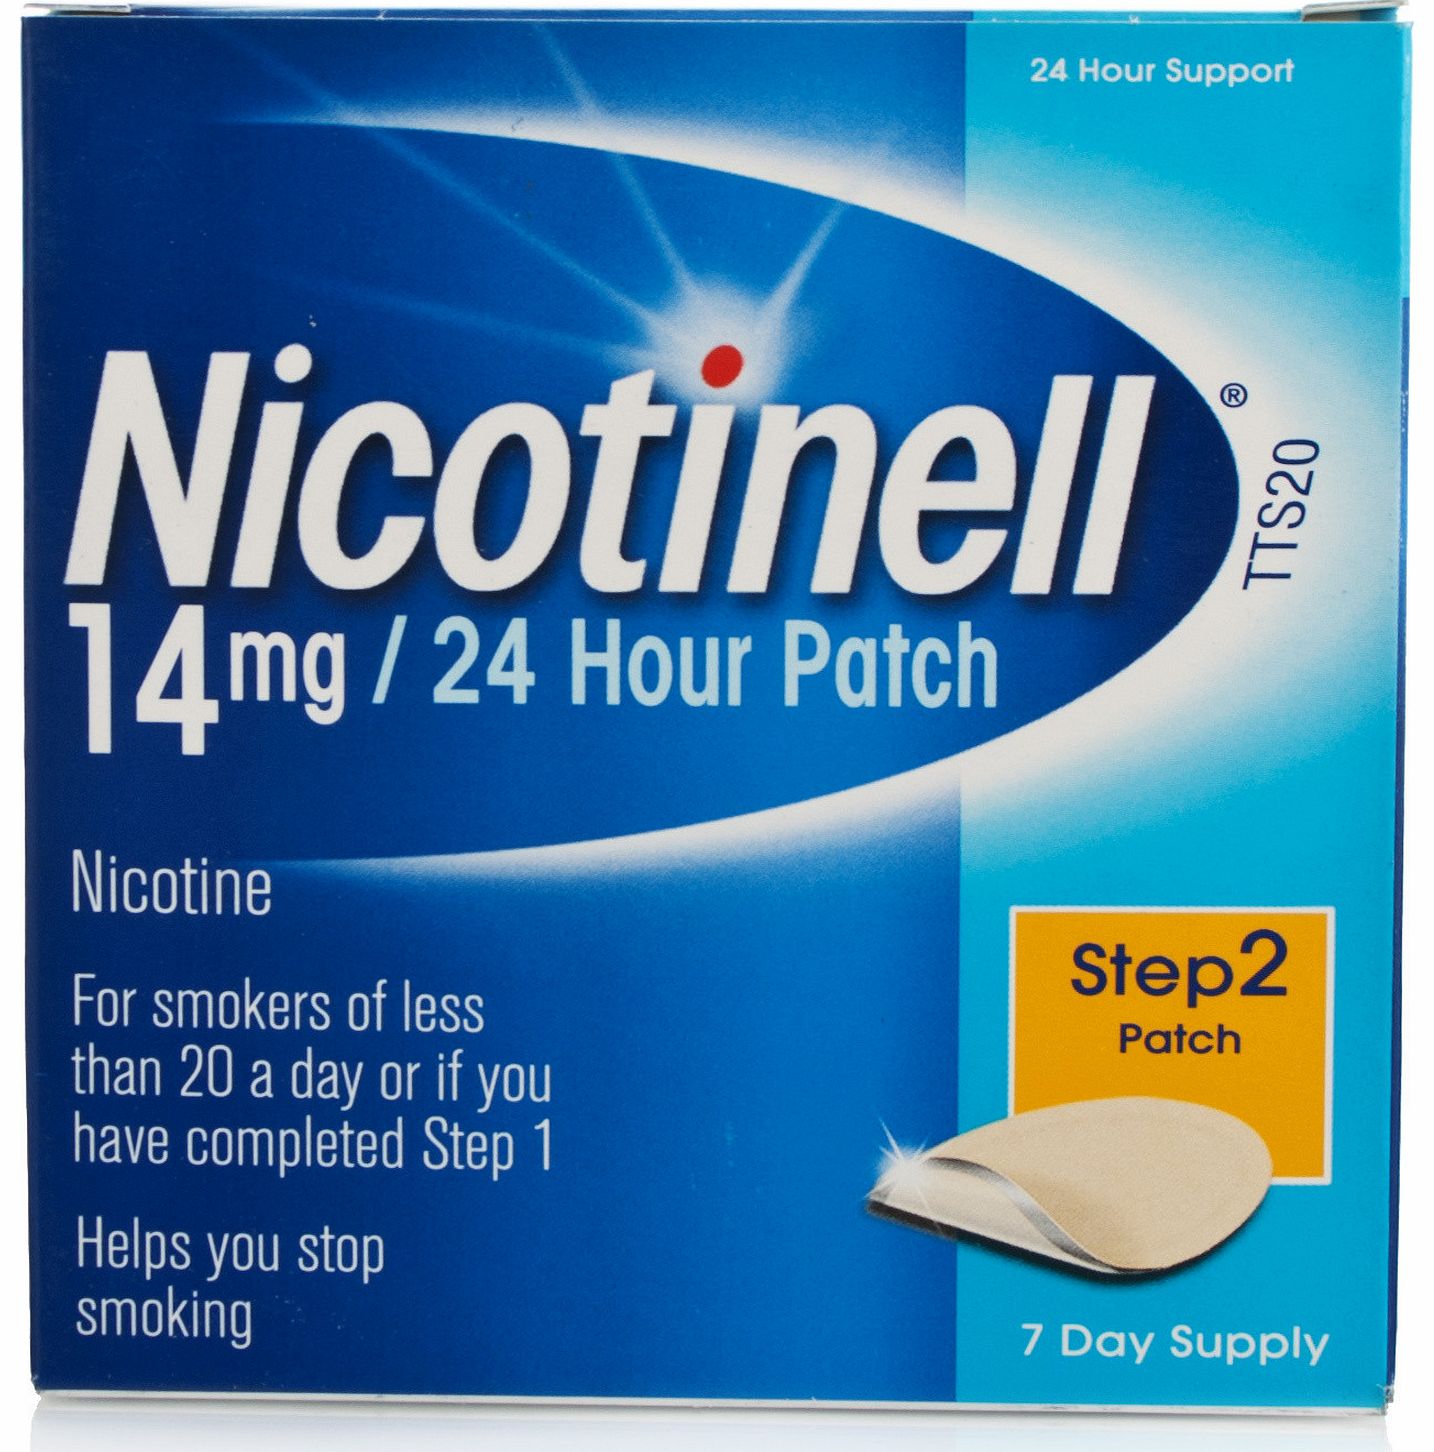 Nicotinell 24 Hour Patches T.T.S20. 14mg Step 2